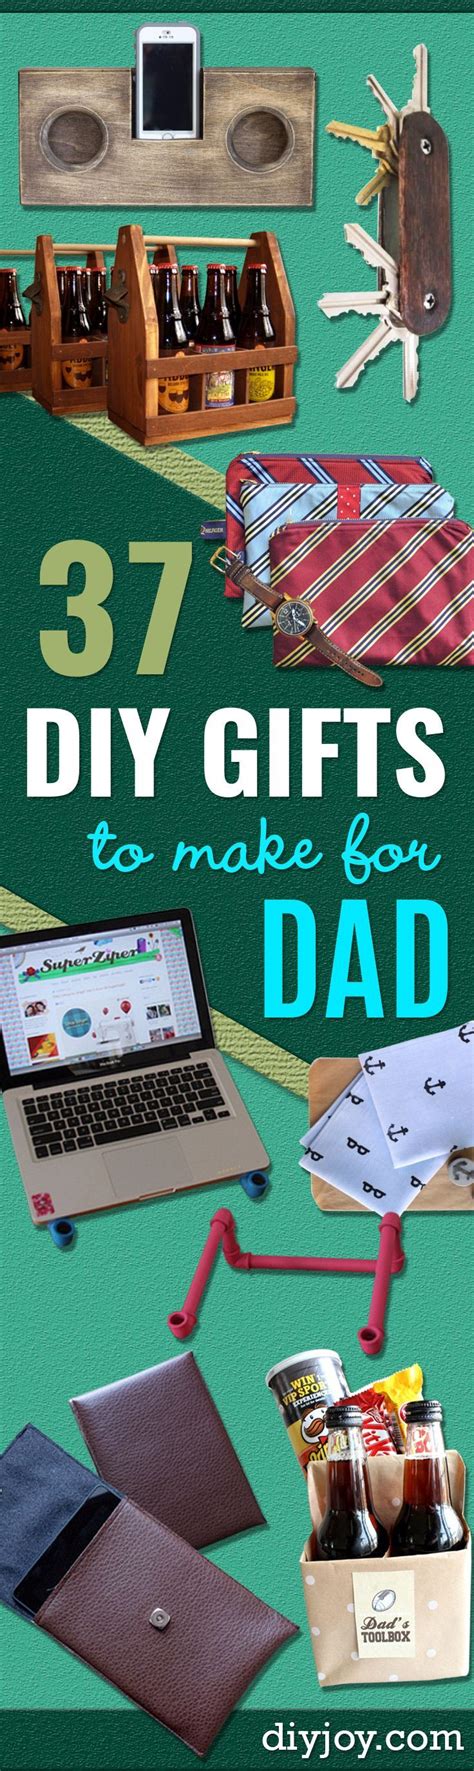 Fathers day gifts handmade last minute homemade birthday gifts for dad. 37 DIY Gifts to Make for Dad | Diy gifts to make, Diy ...